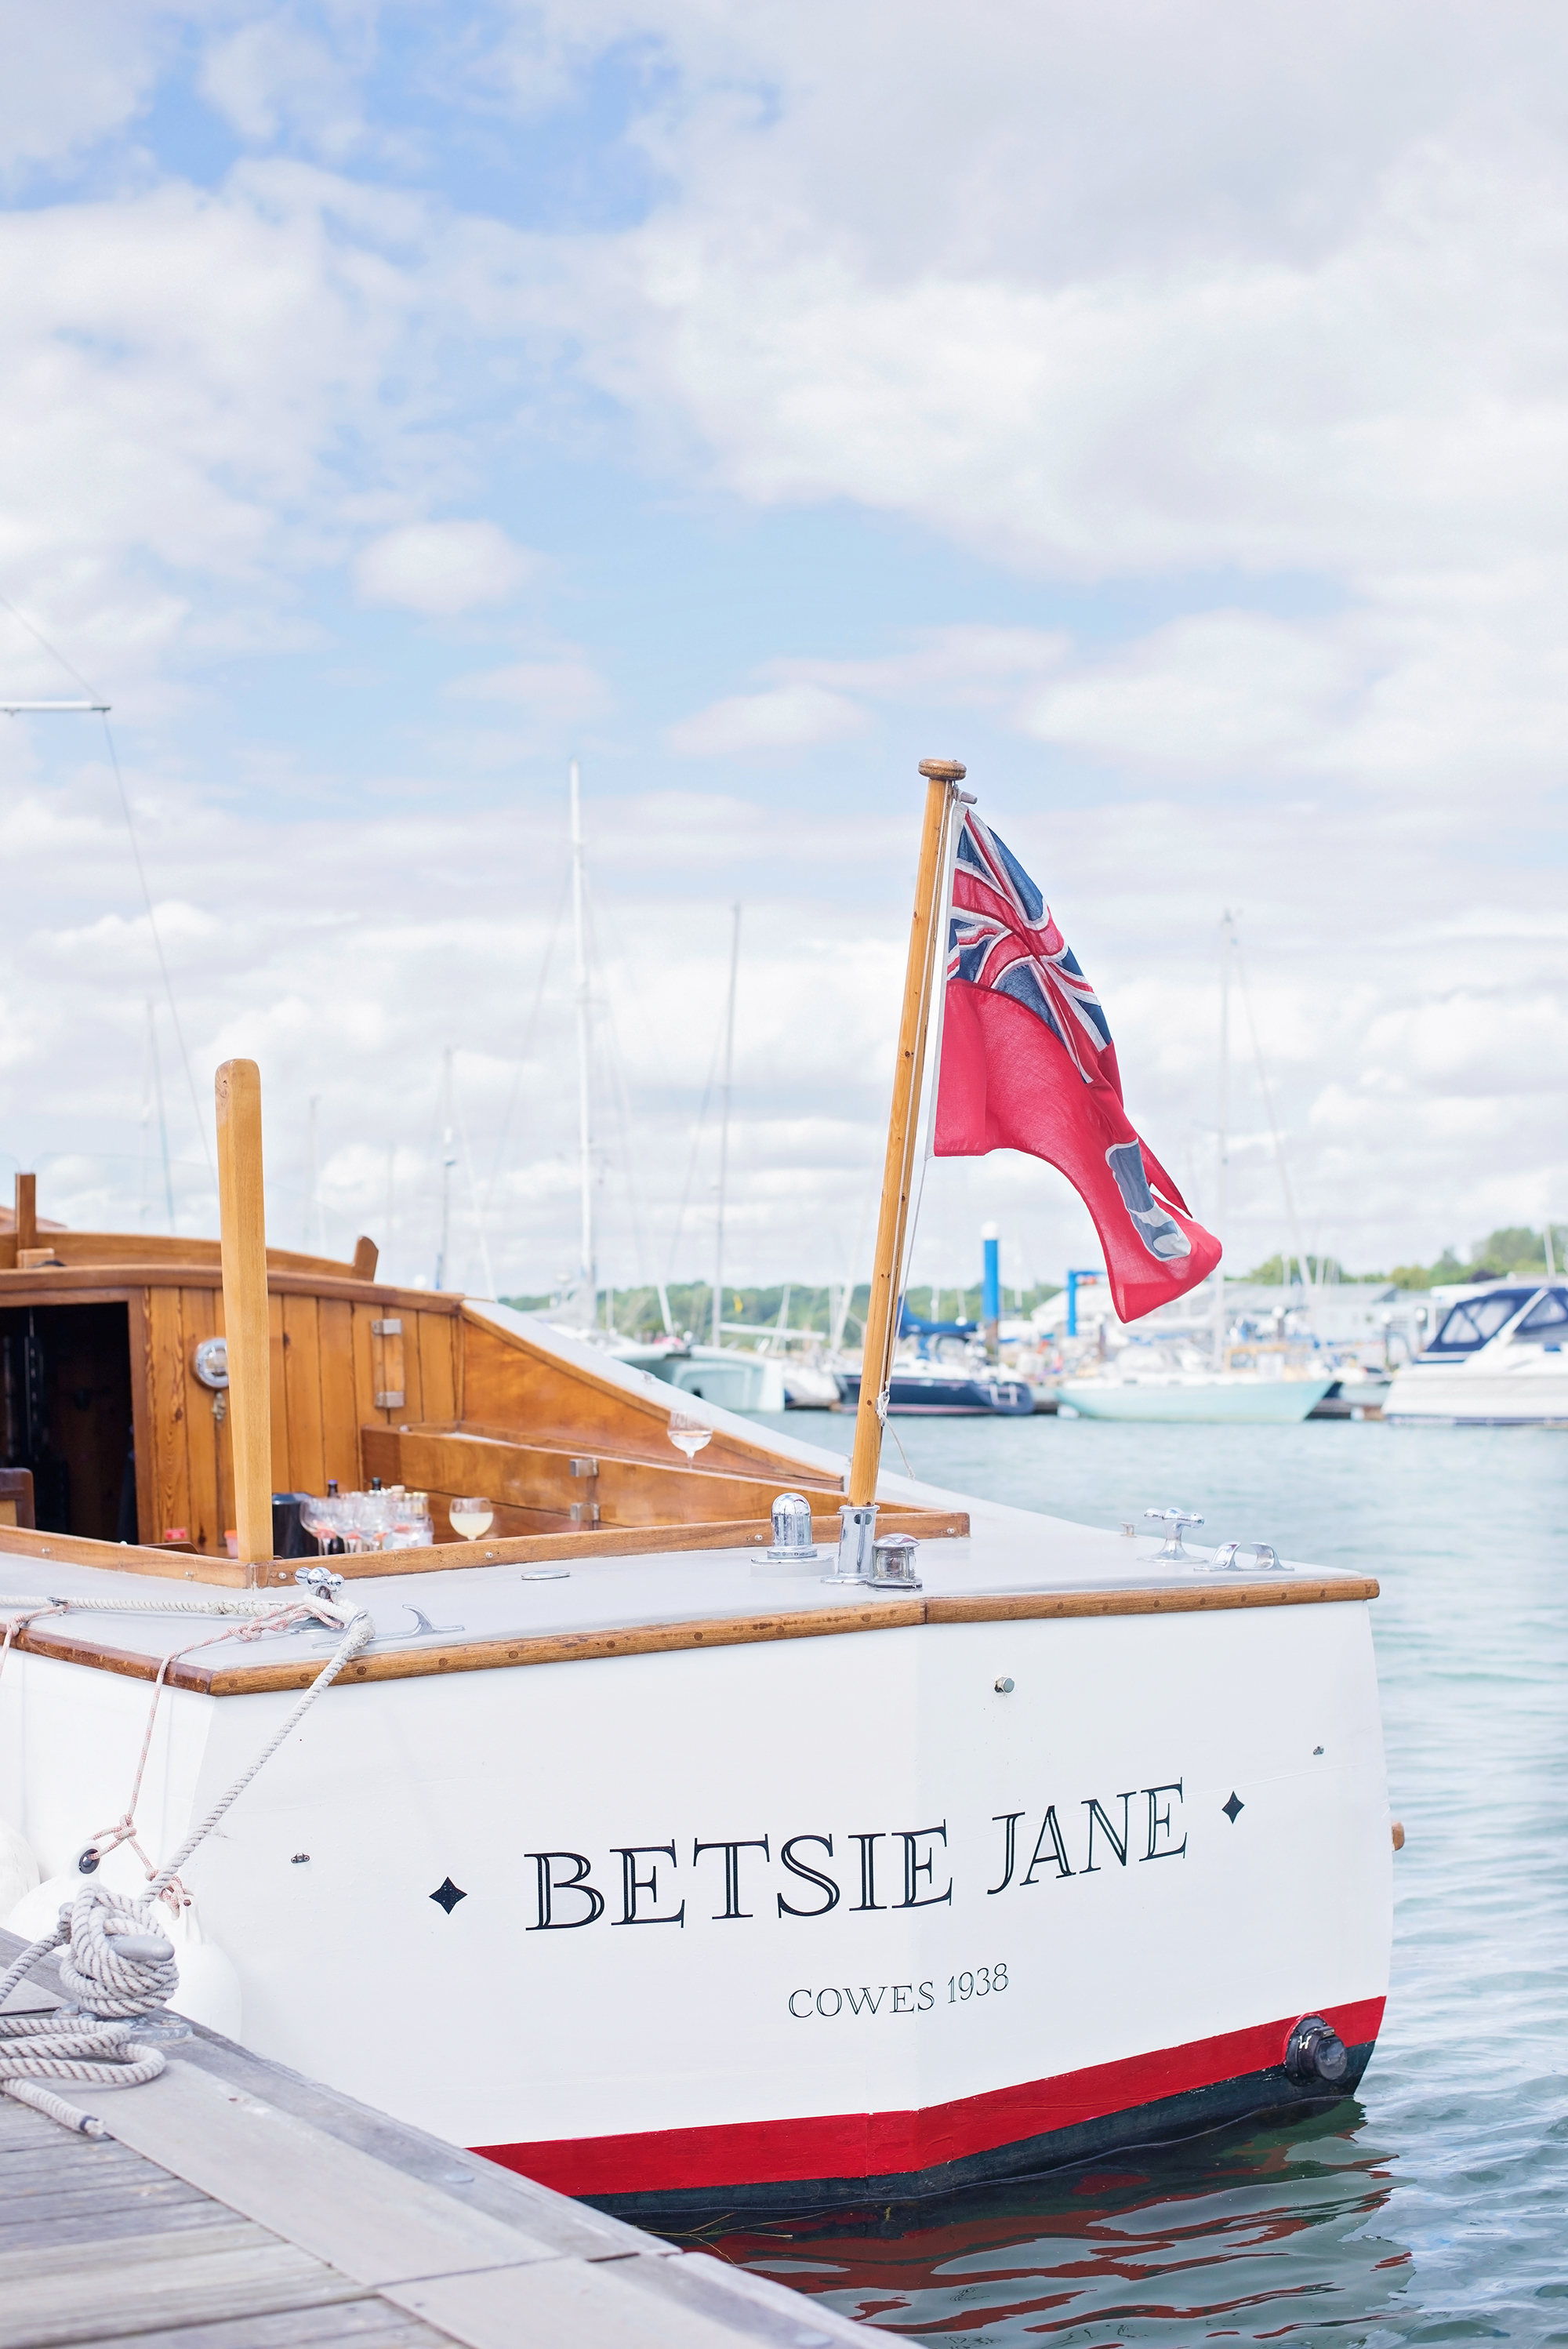 AFTERNOON GIN CRUISE ON THE RIVER HAMBLE